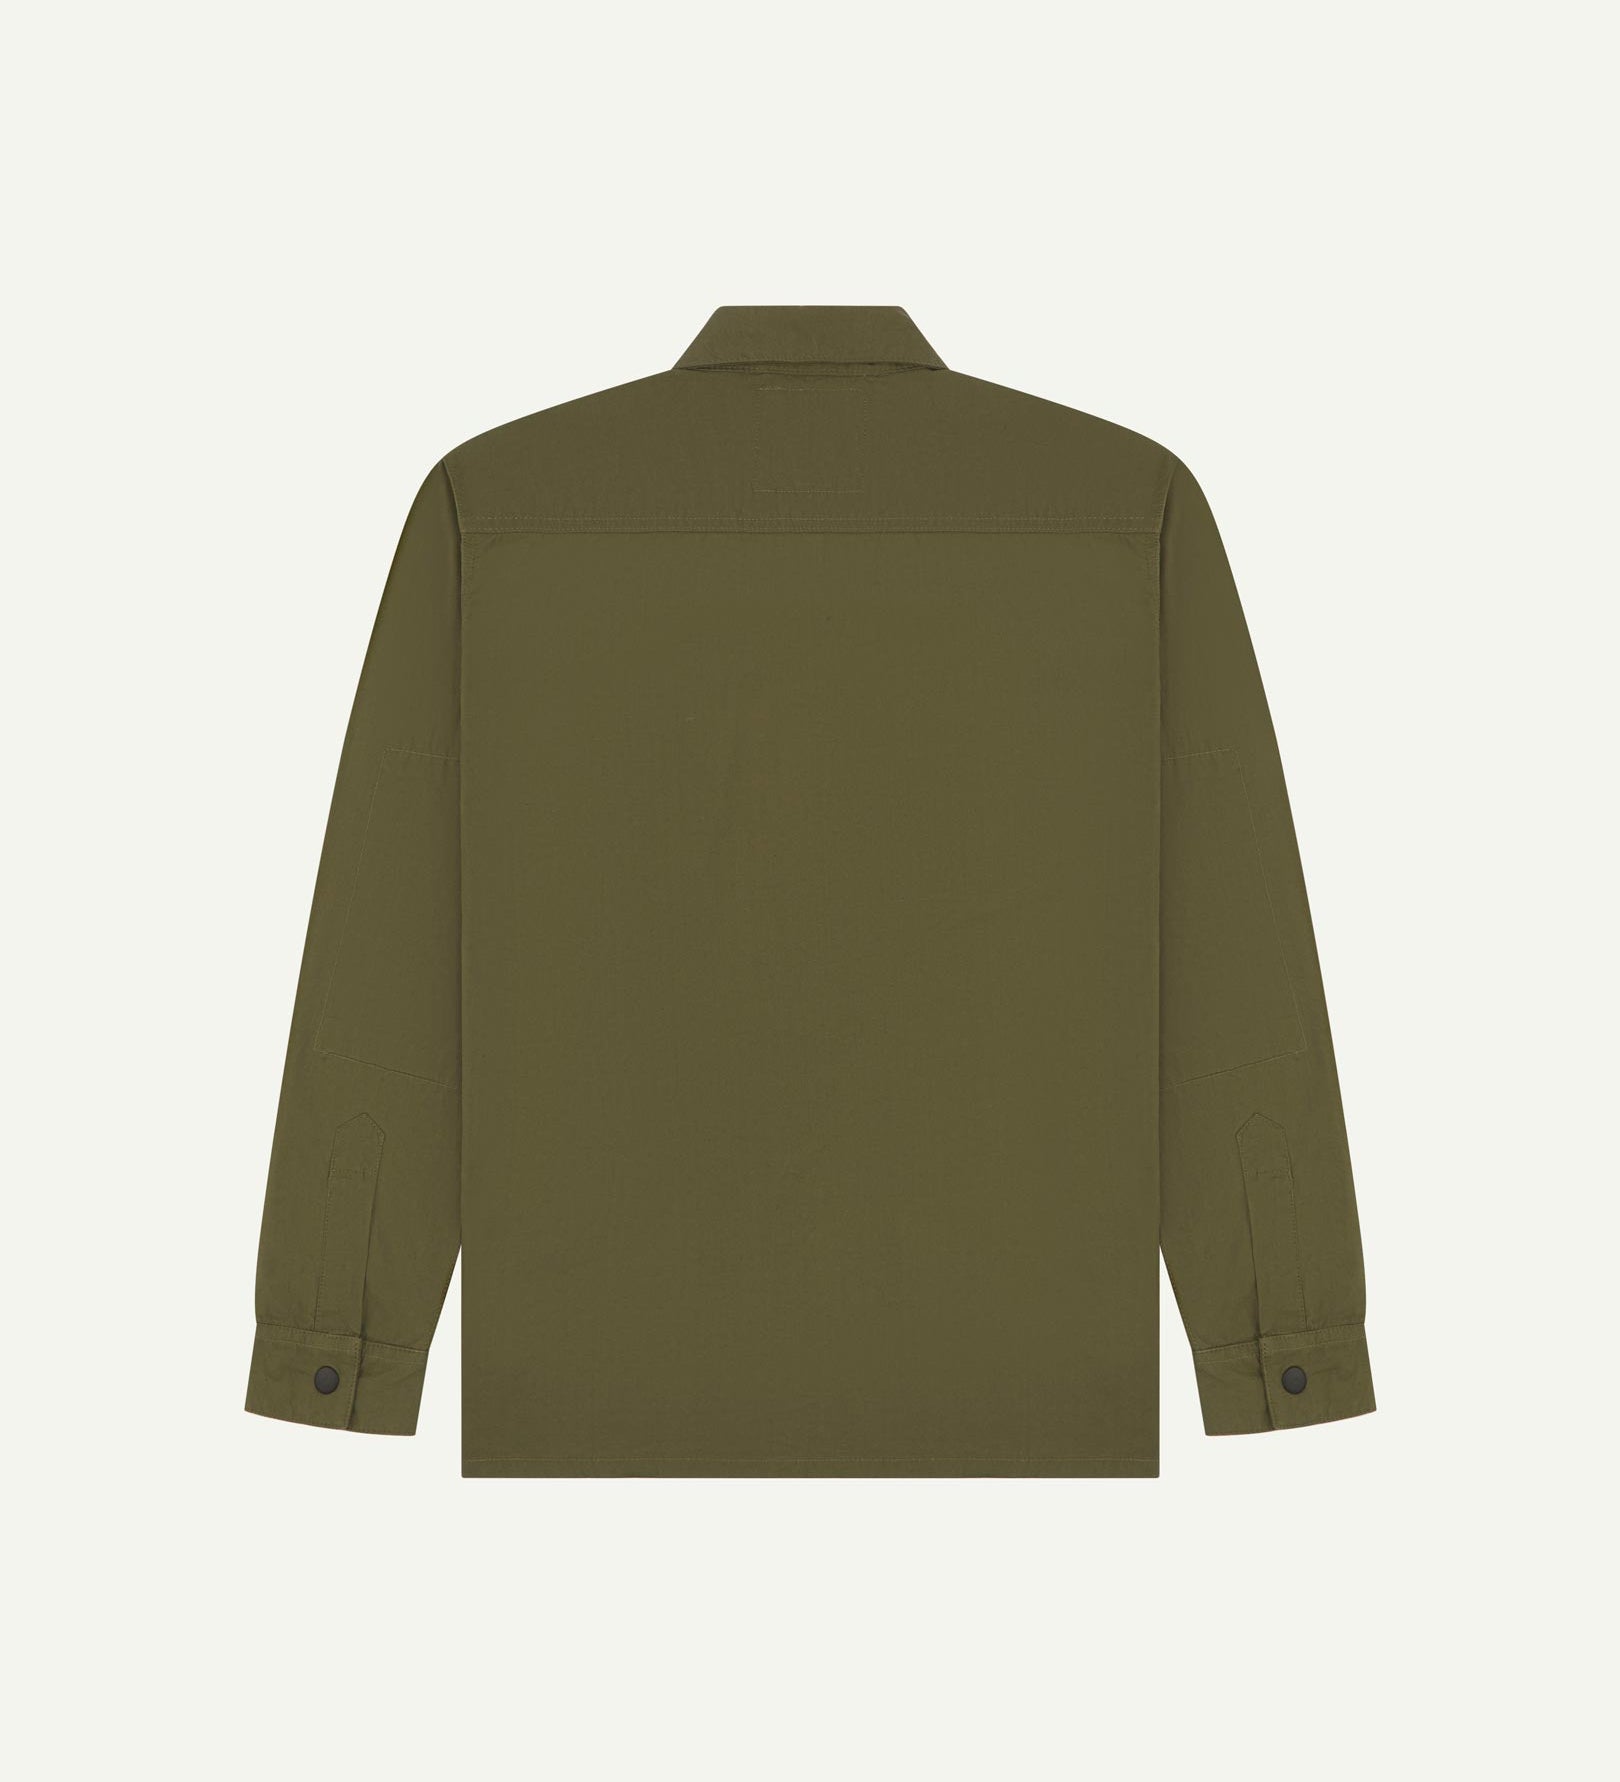 Reverse view of olive-green, lightweight zip-front jacket showing reinforced elbows, boxy silhouette and 'popper' cuffs.